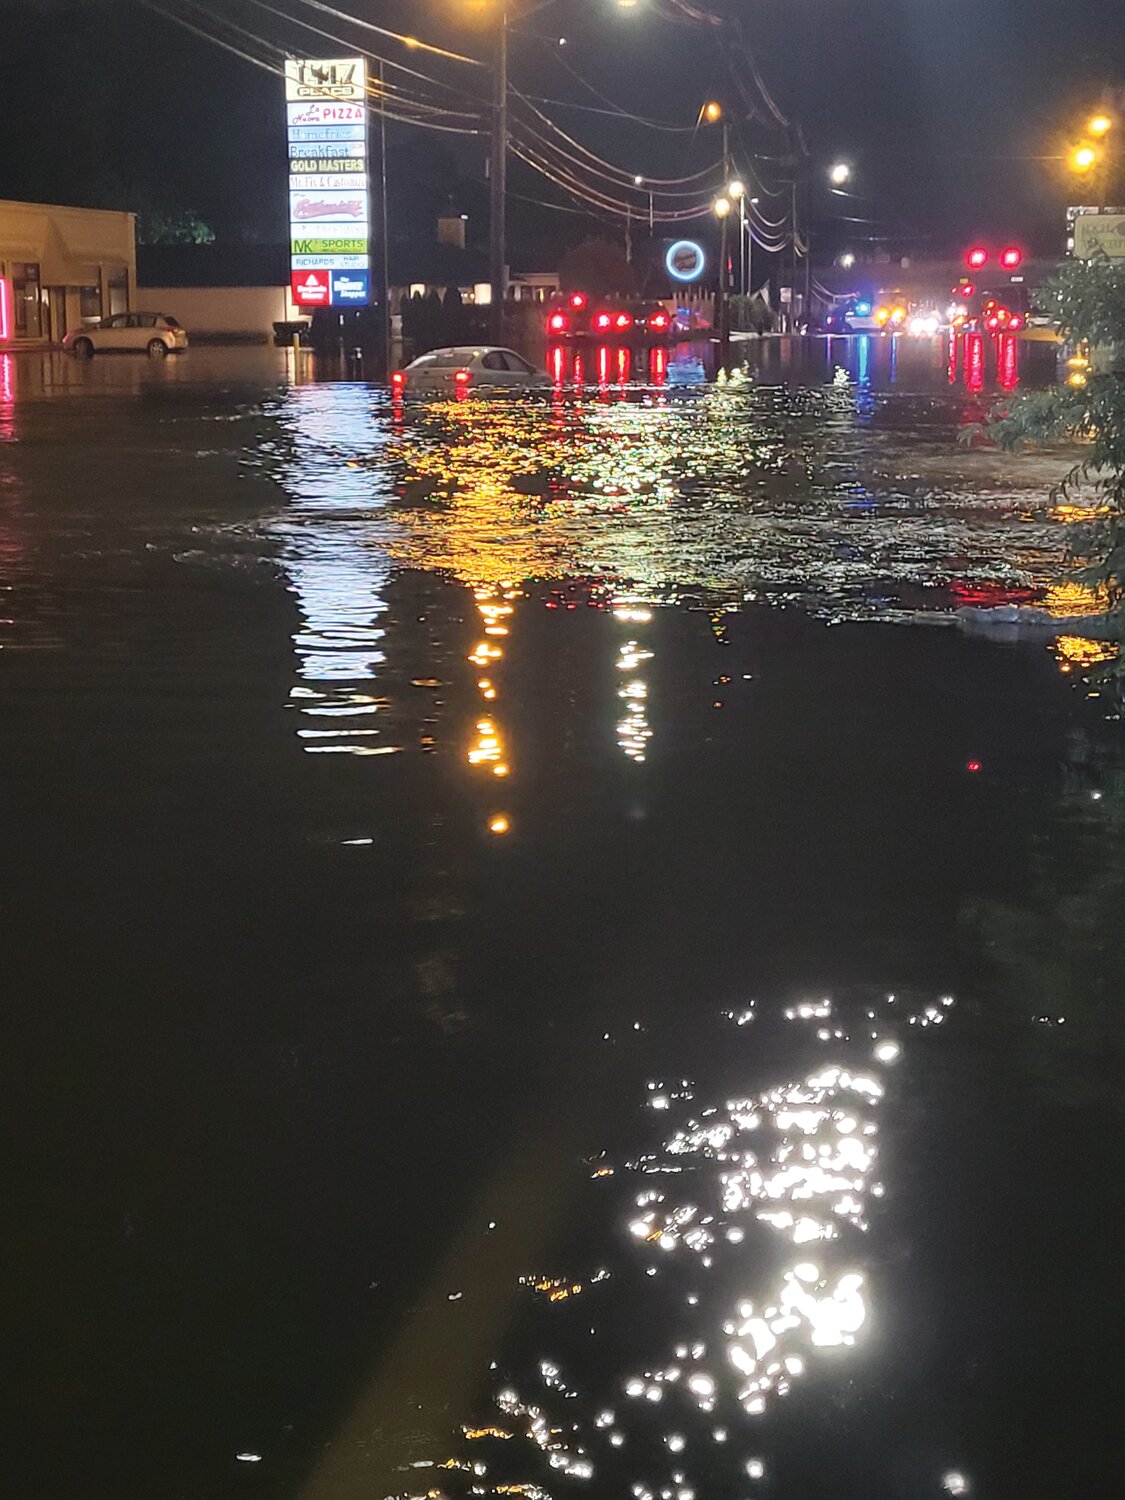 LIKE A BOBBER: Later Monday night, a stranded vehicle continued to float around a flooded Atwood Avenue as the waters rose, but tow trucks were unable to reach it until the waters receded.